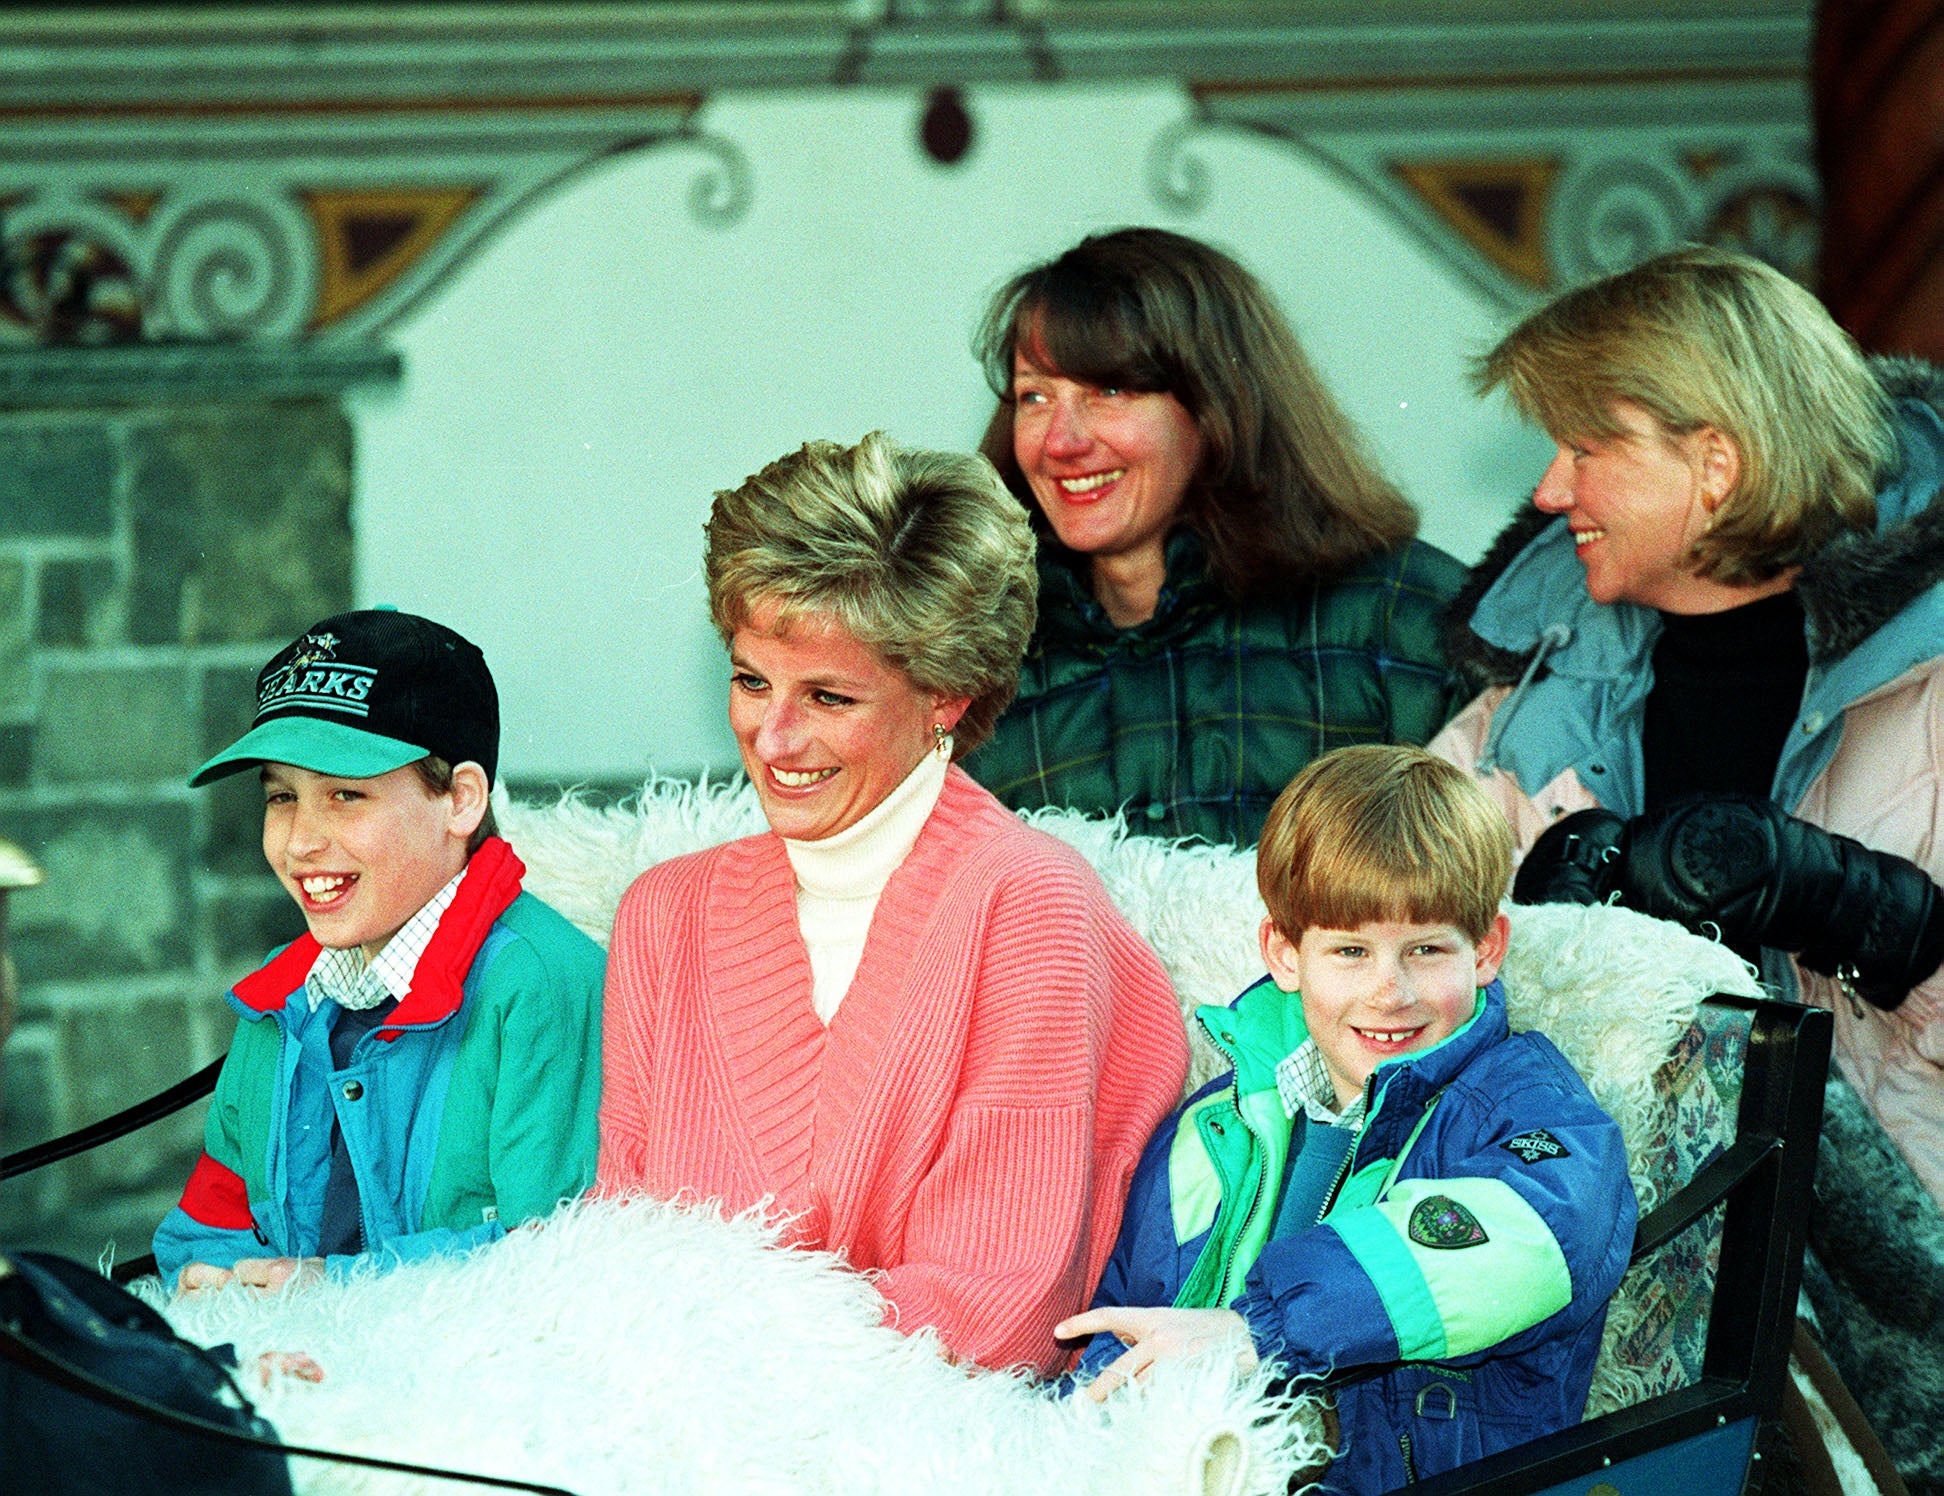 The Princess of Wales with her two sons William (left) and Harry riding in a horse-drawn sleigh in 1994 (Martin Keene/PA)